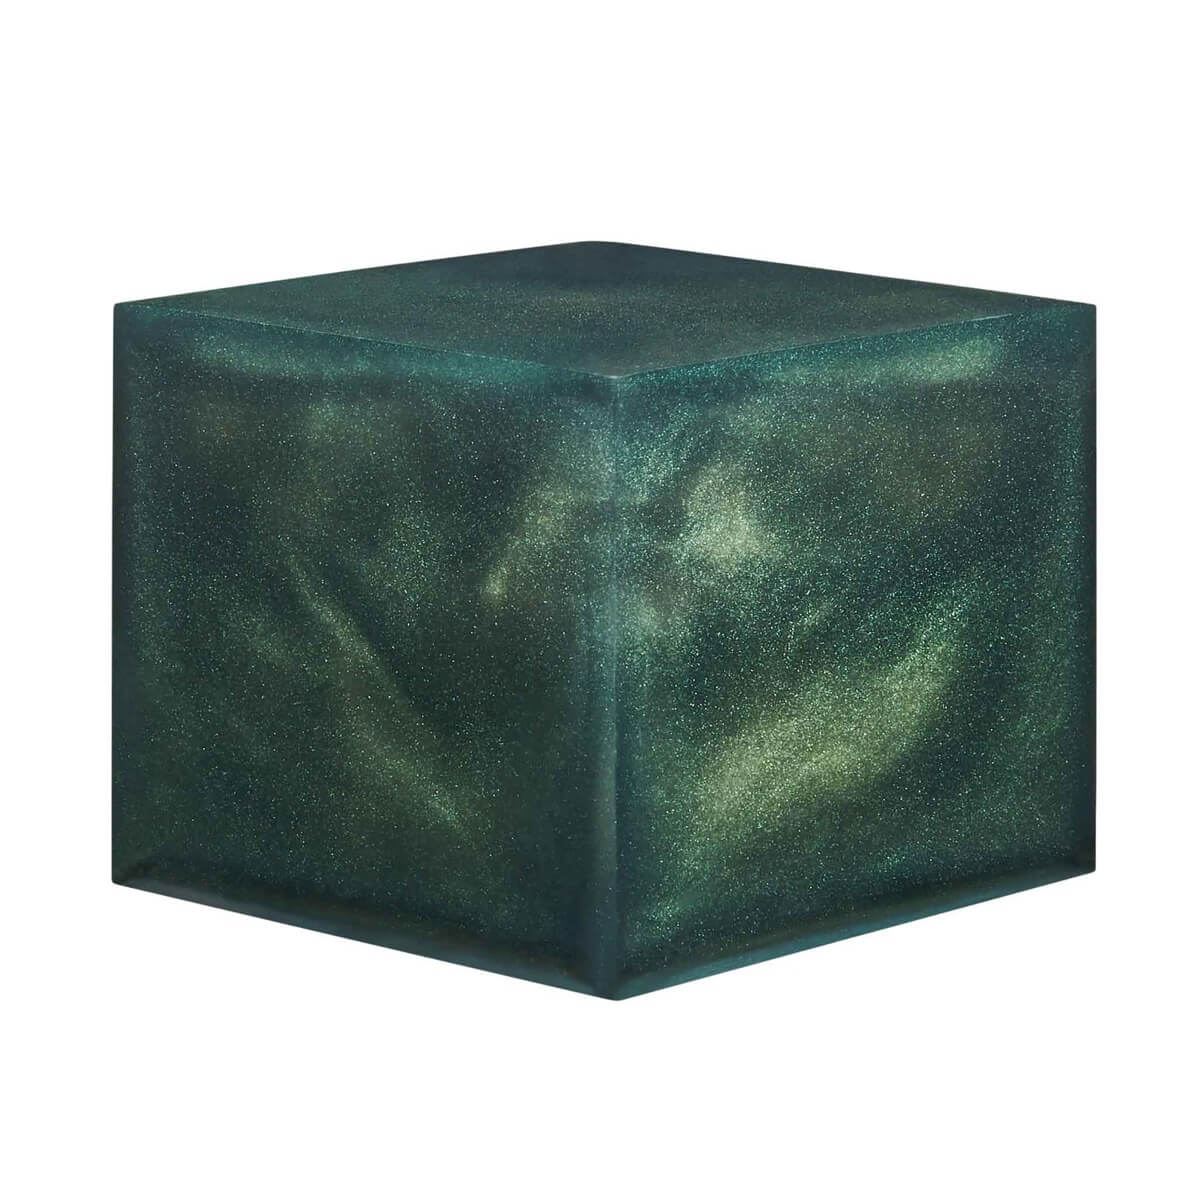 A resin cube made with the Pine Green Mica Powder Pigment by Pigmently.